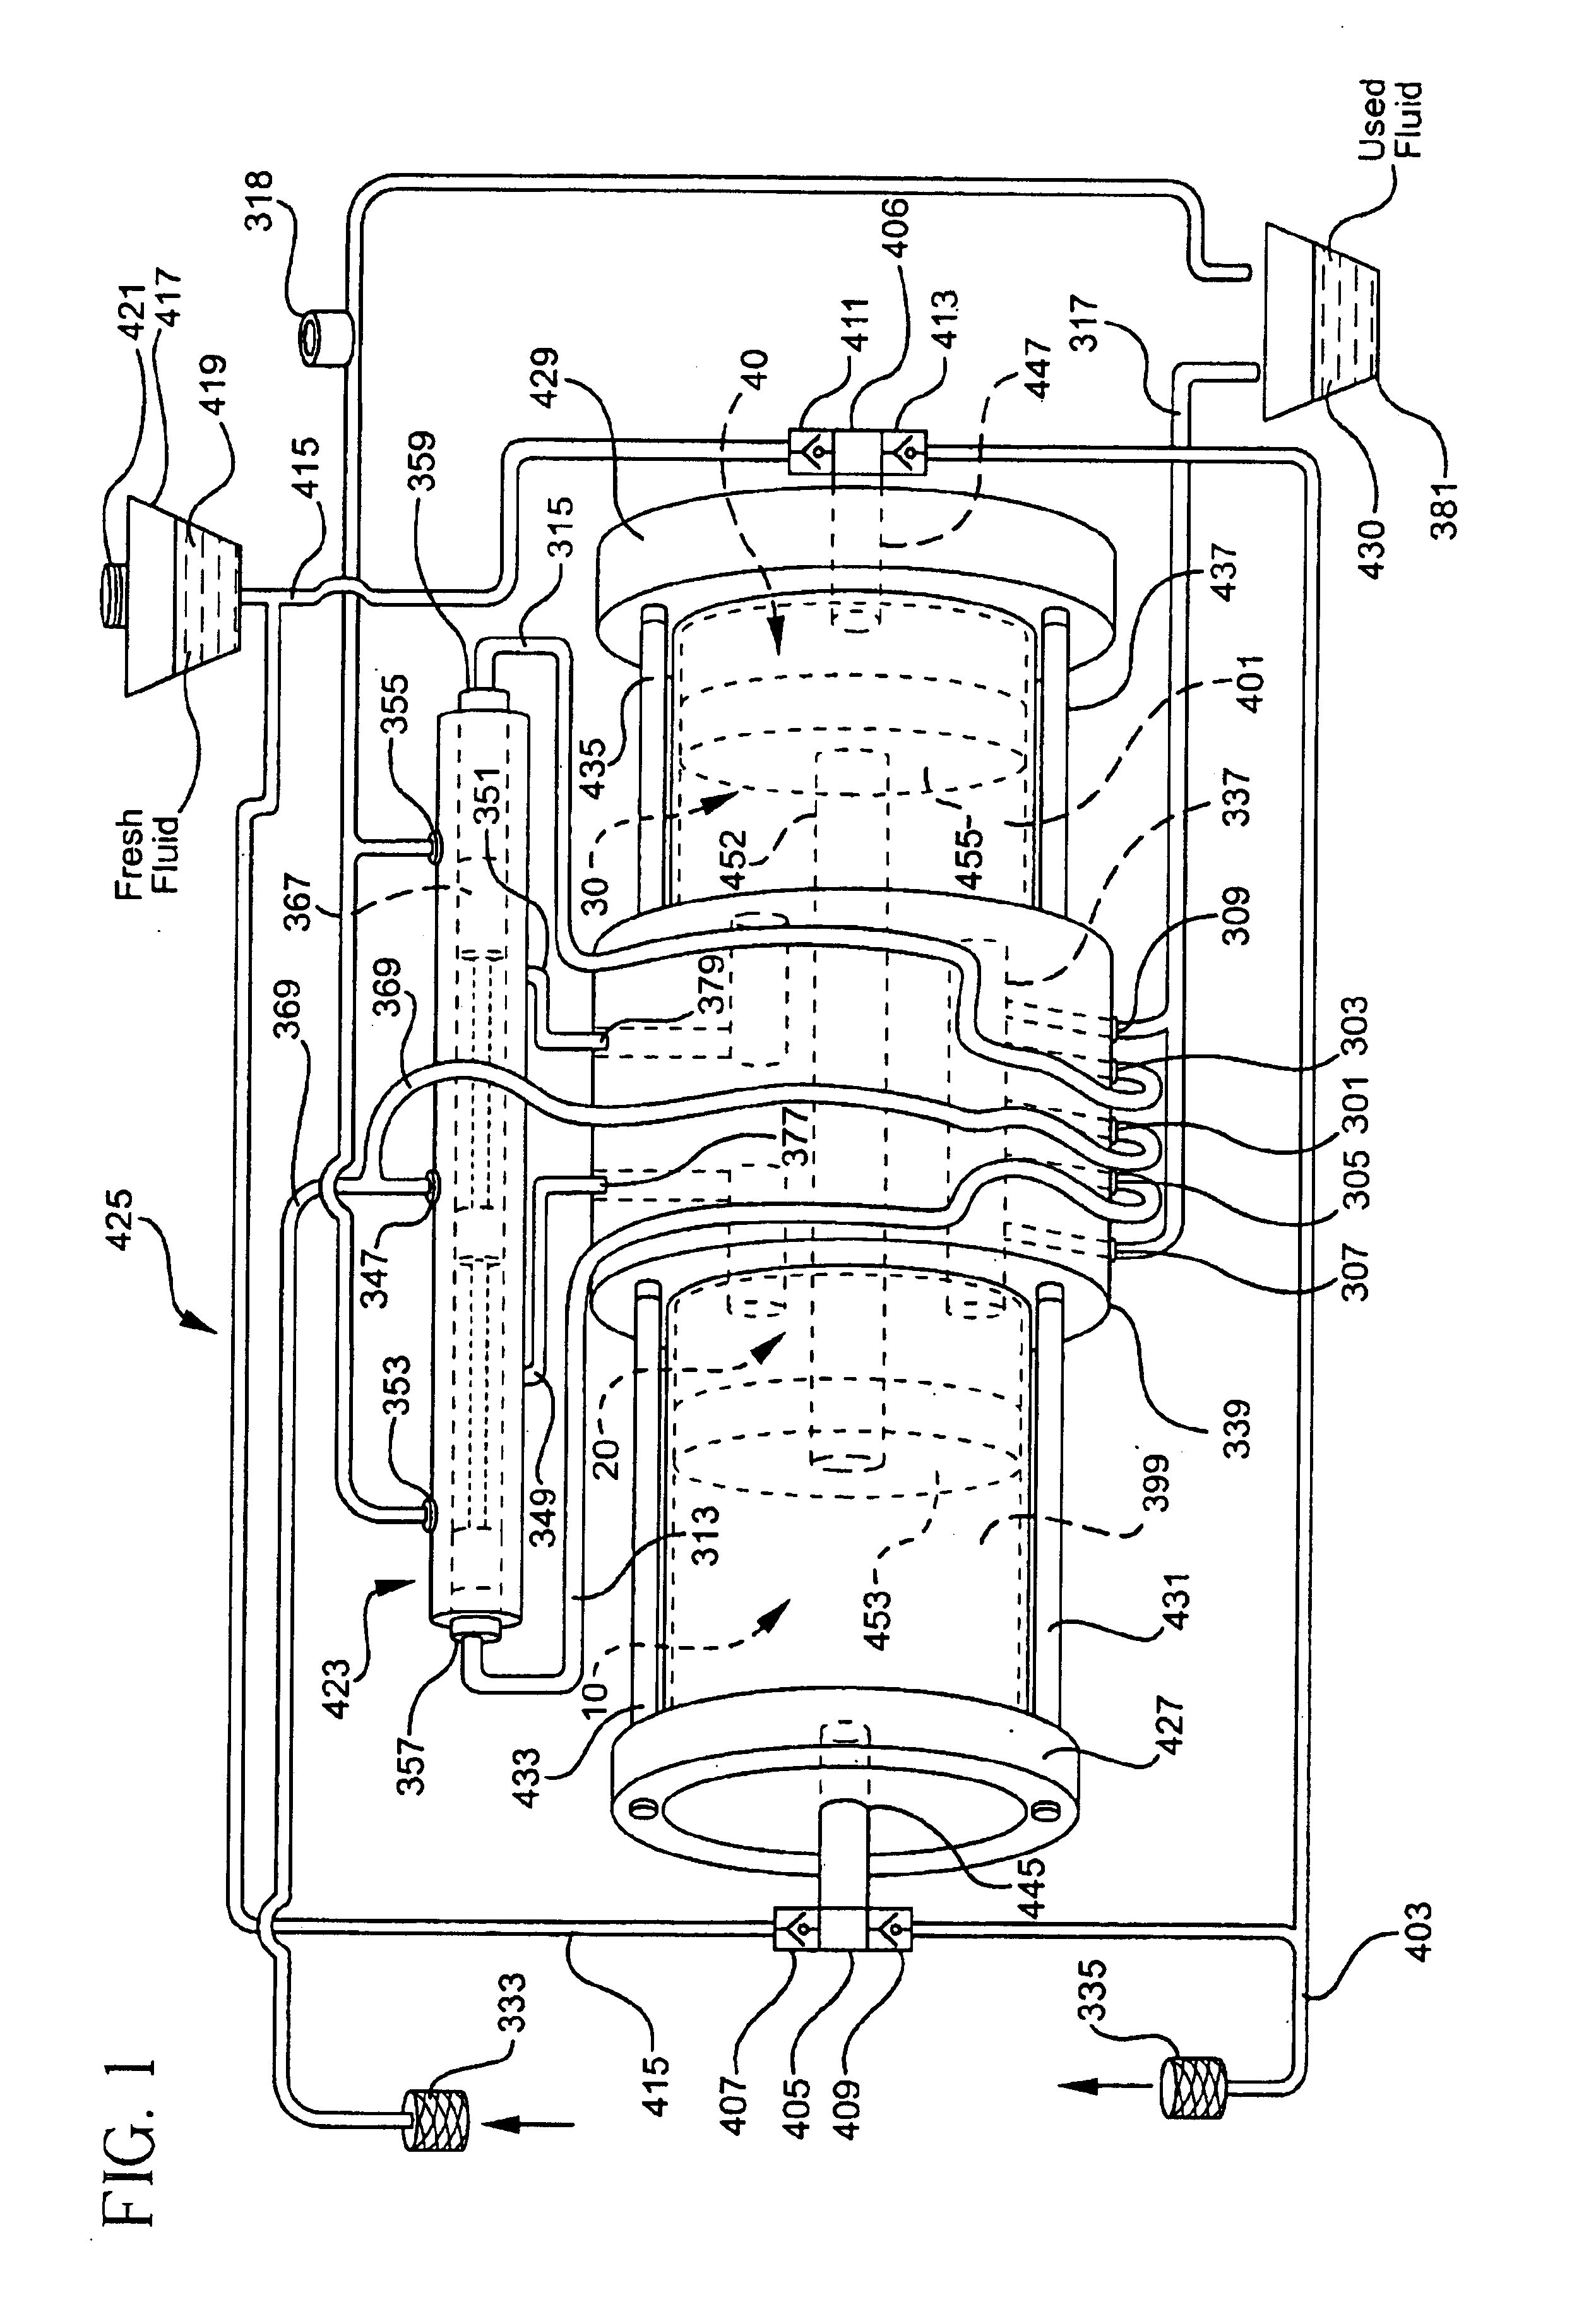 Pilot valve operated reciprocating fluid exchange device and method of use